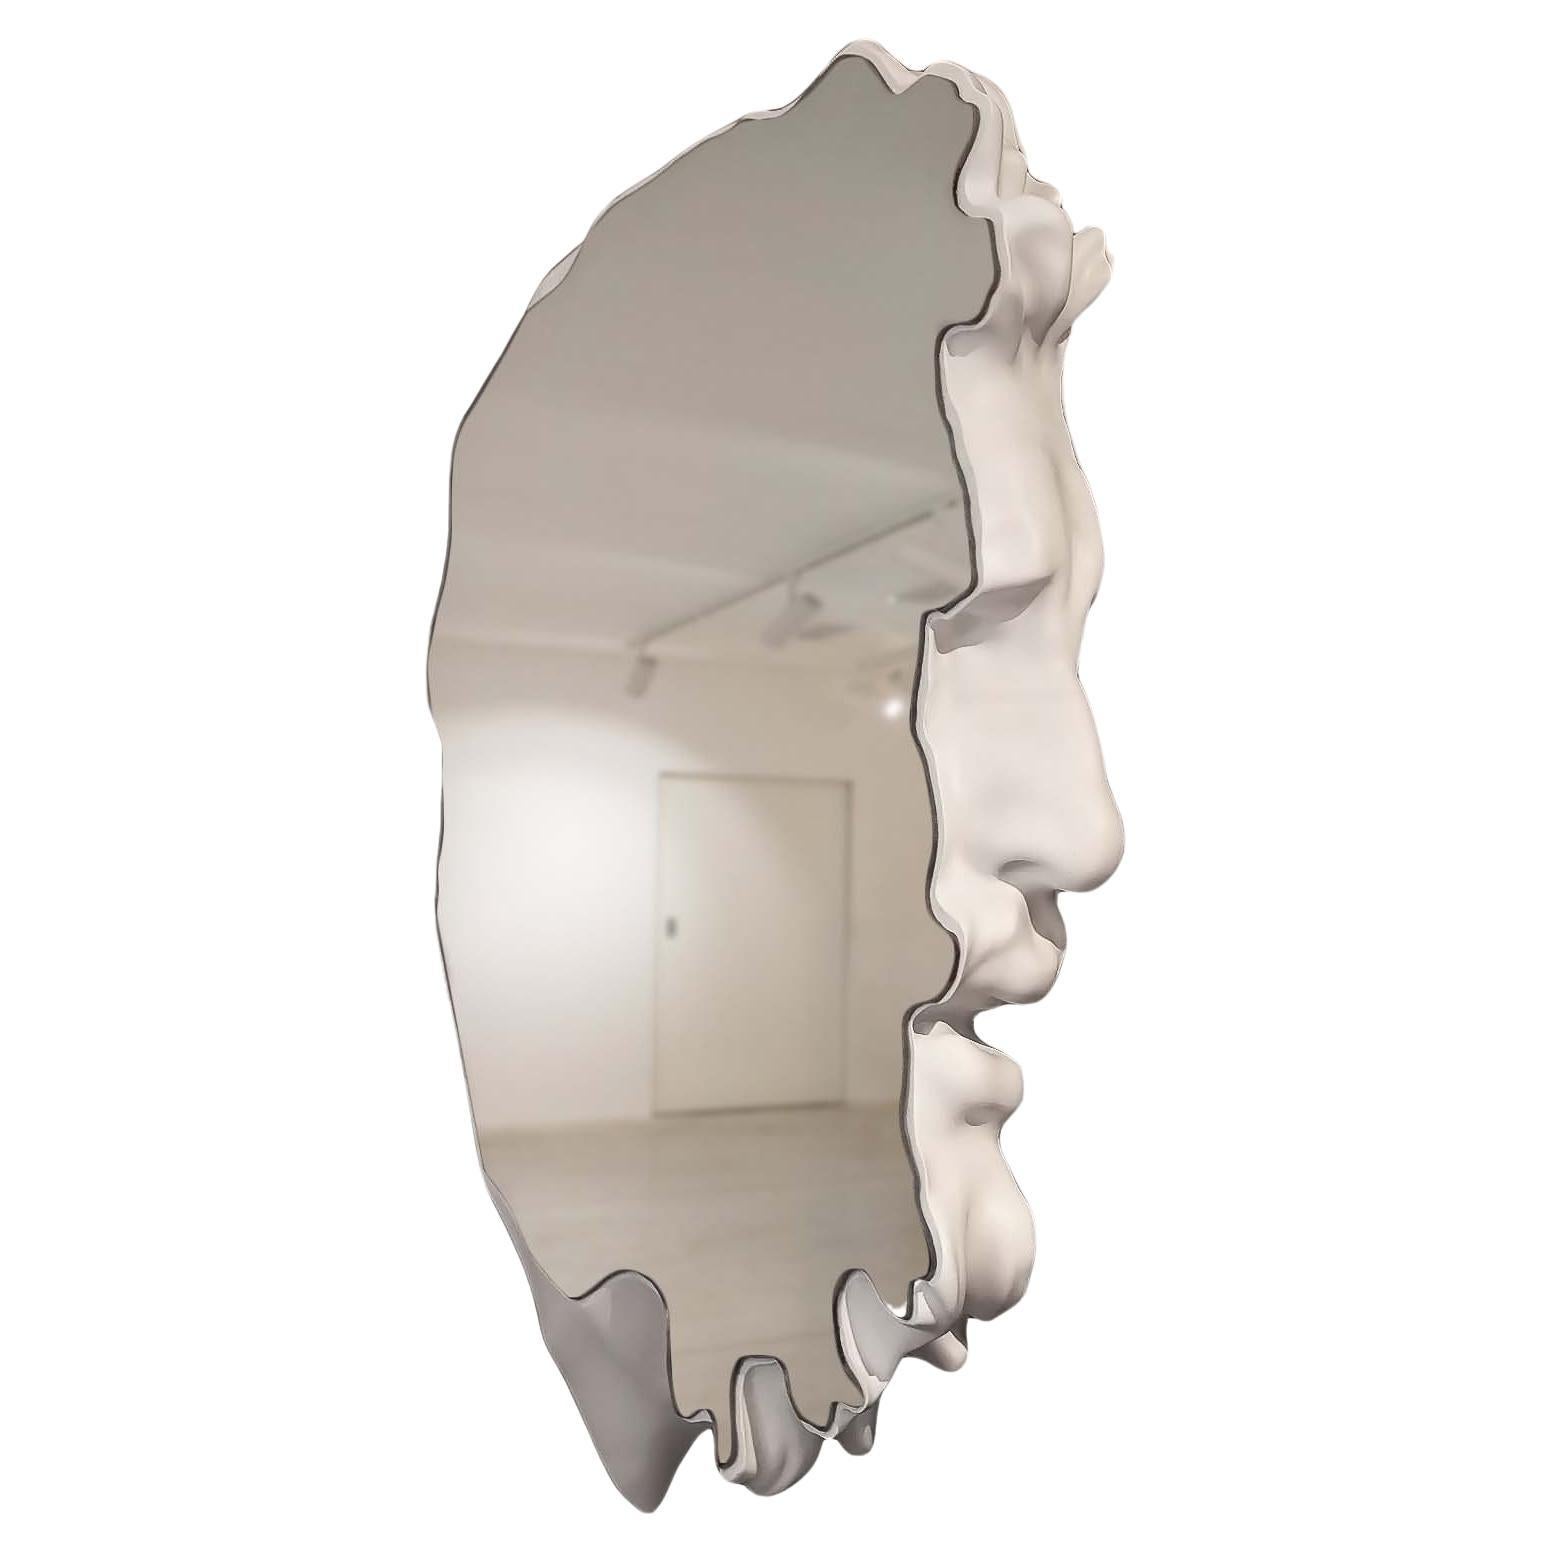 Eduard Locota Augmented Reality Mirror from the Collectible Design Collection